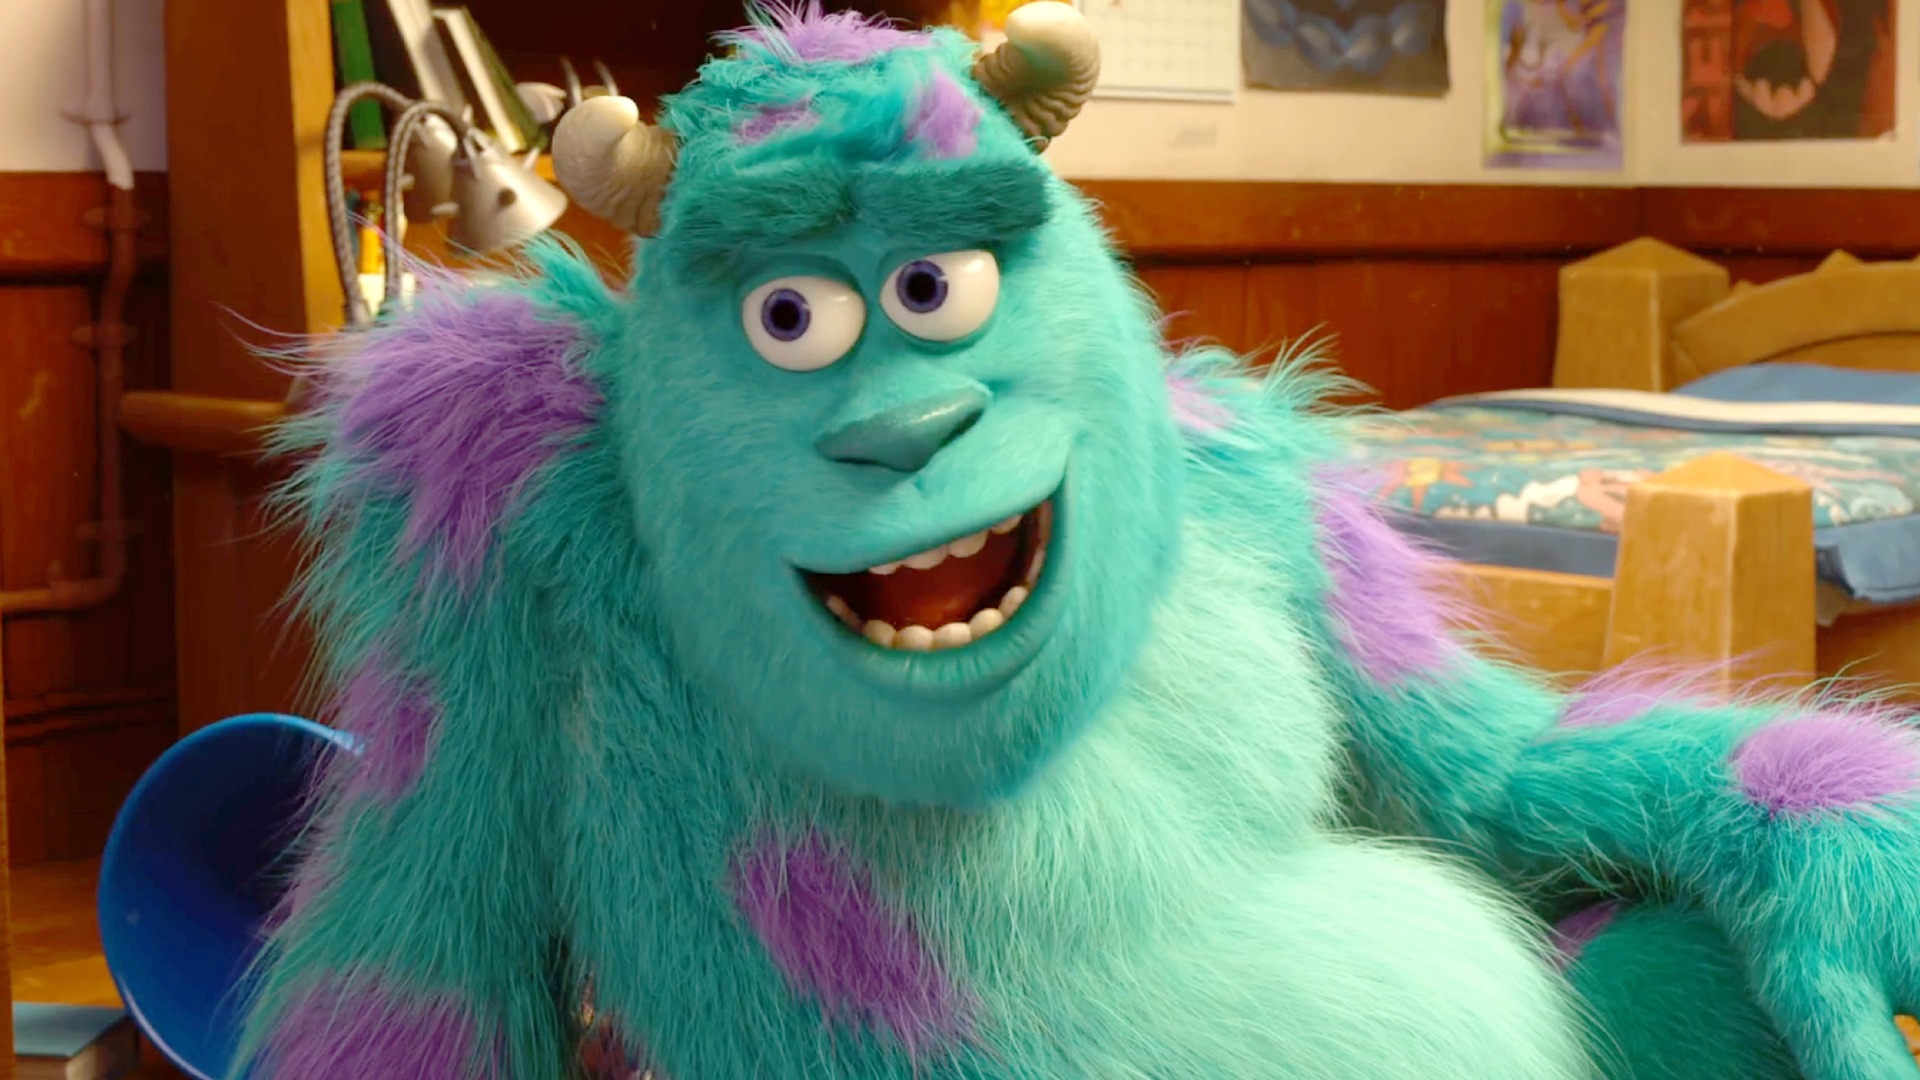 Get Spooked by This New 'Monsters University' Trailer